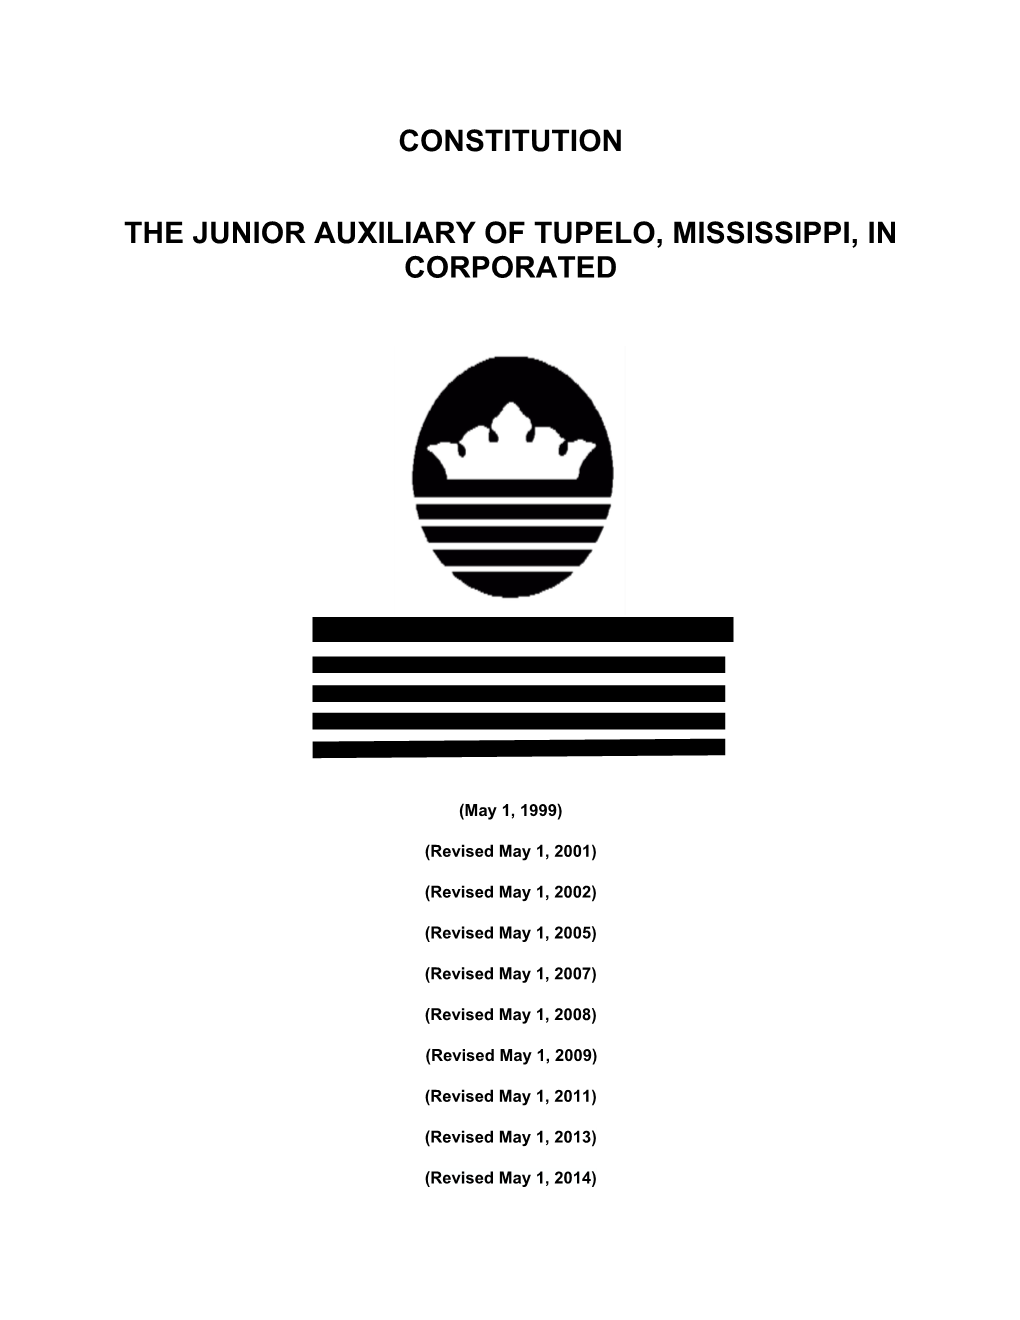 Thejunior Auxiliary of Tupelo, Mississippi, Incorporated